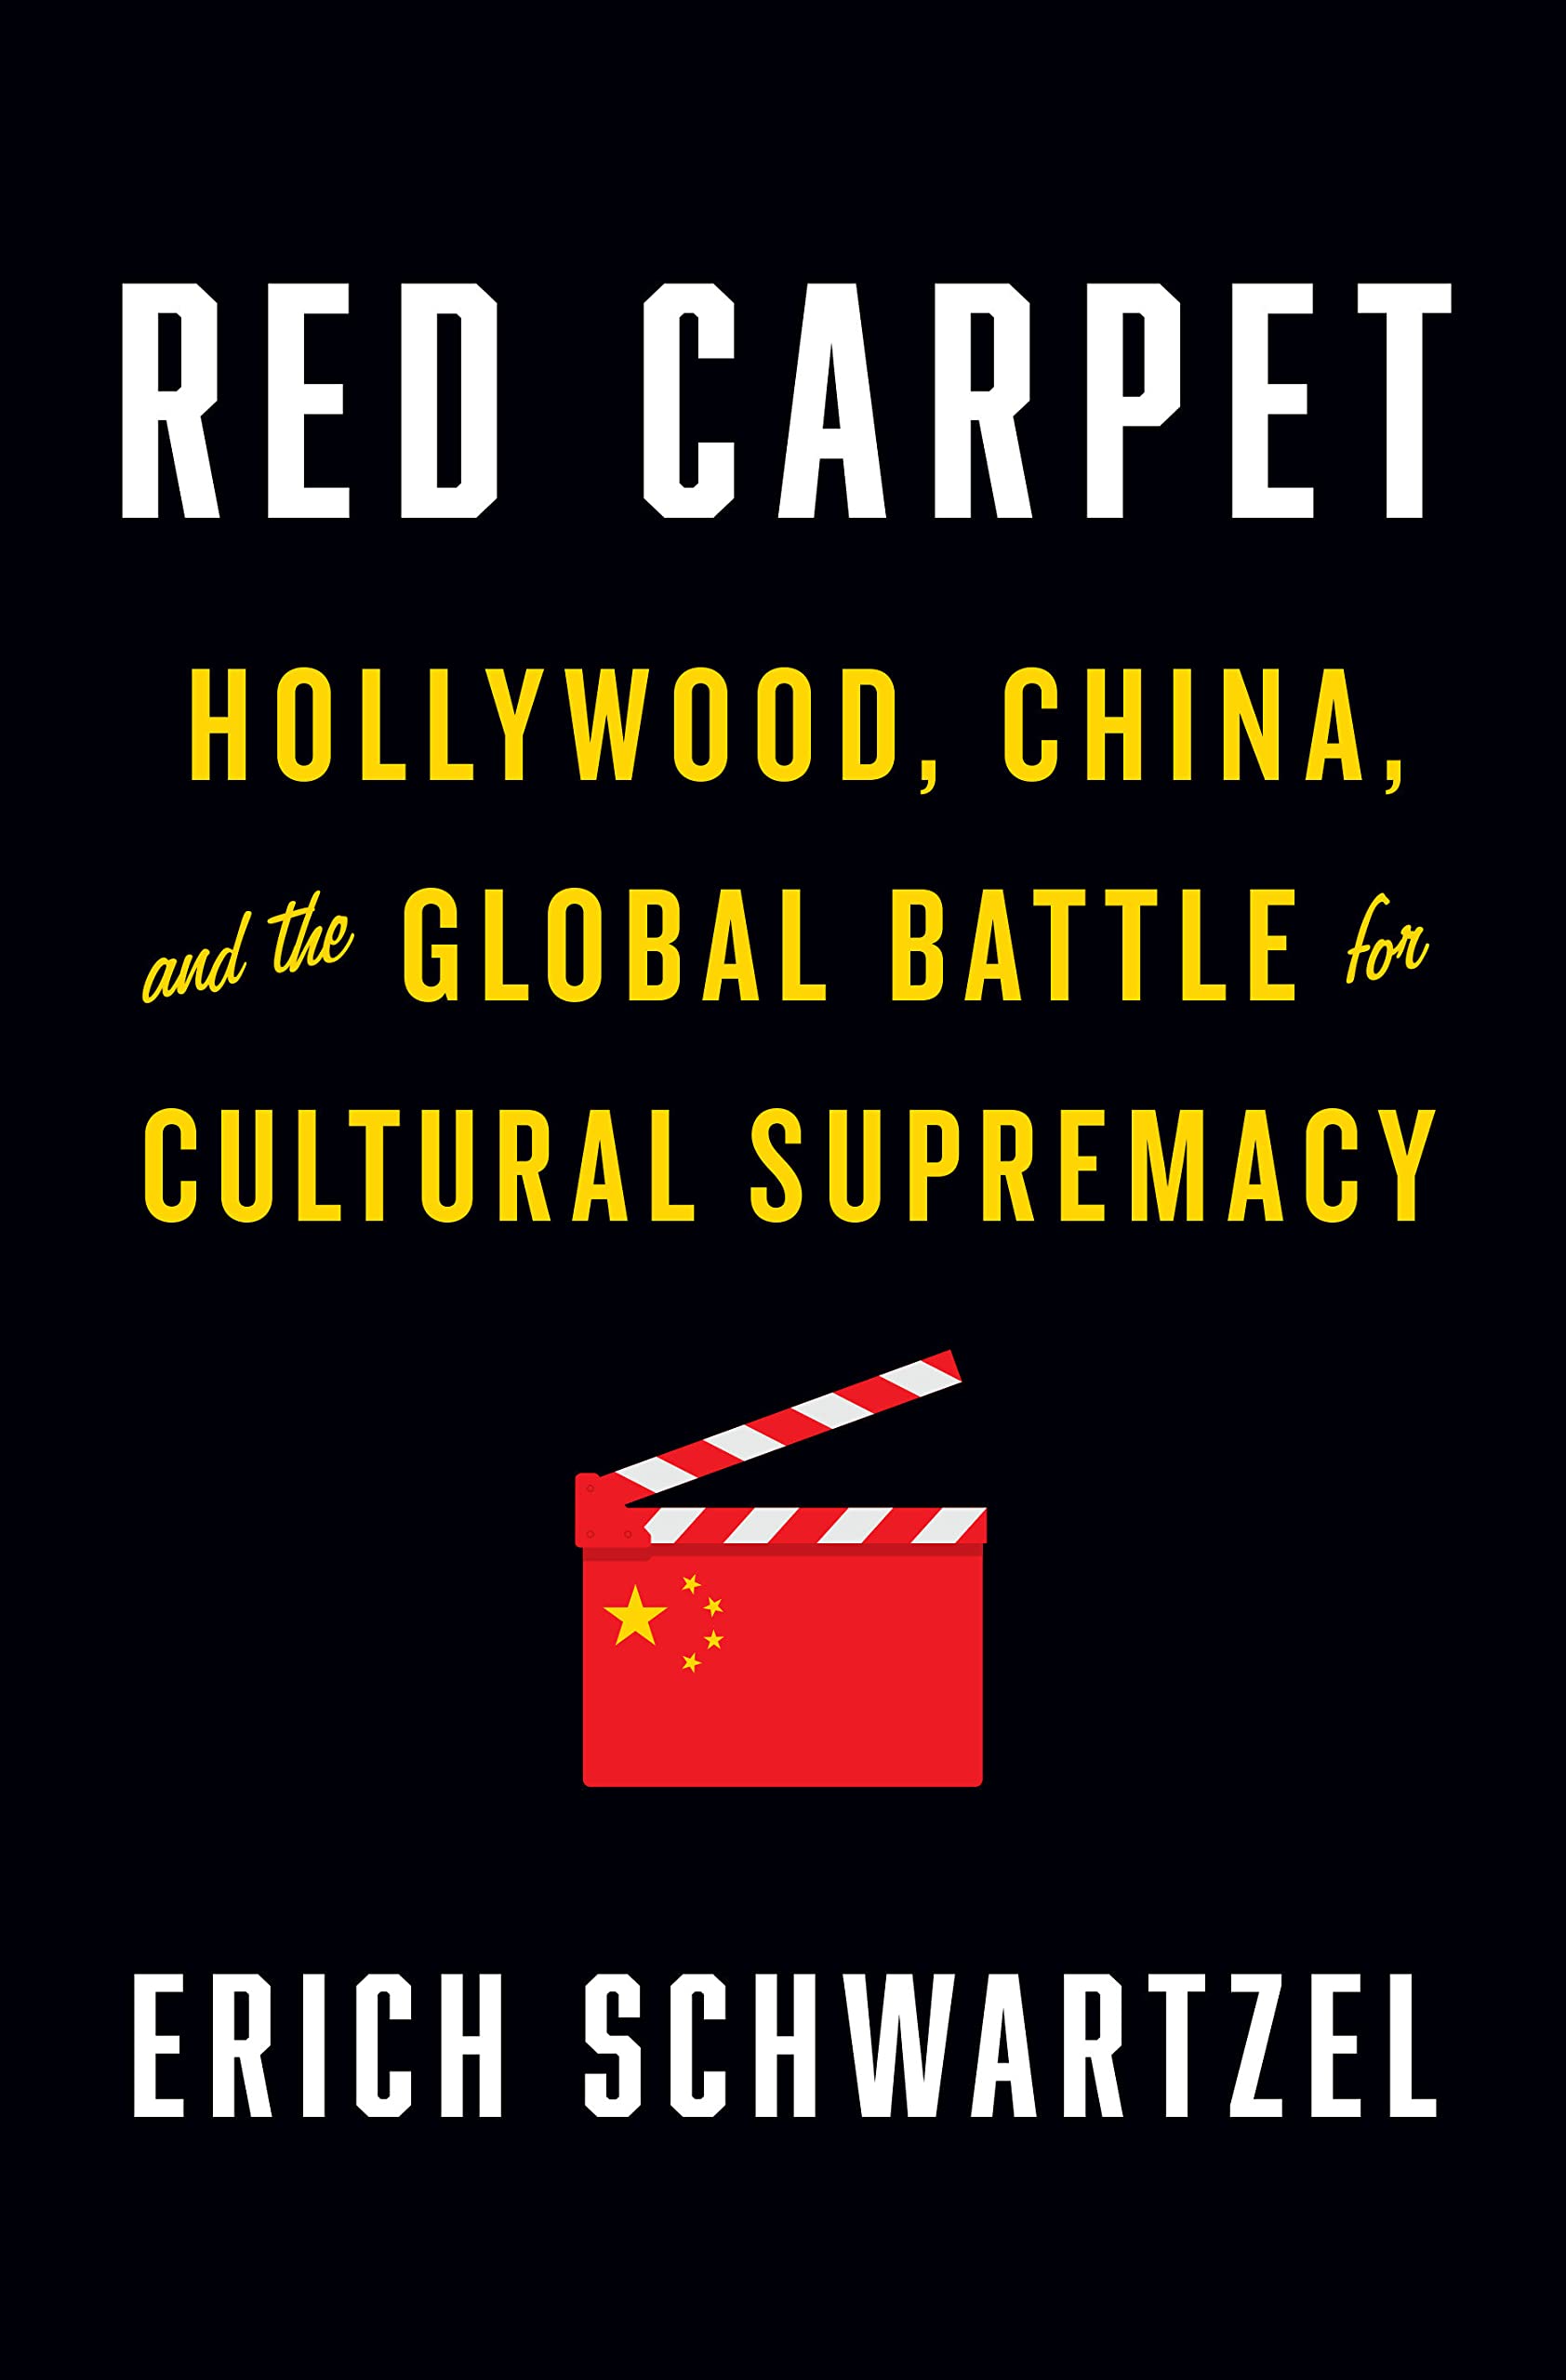 Red Carpet: Hollywood, China, and the Global Battle for Cultural Supremacy by Erich Schwartzel